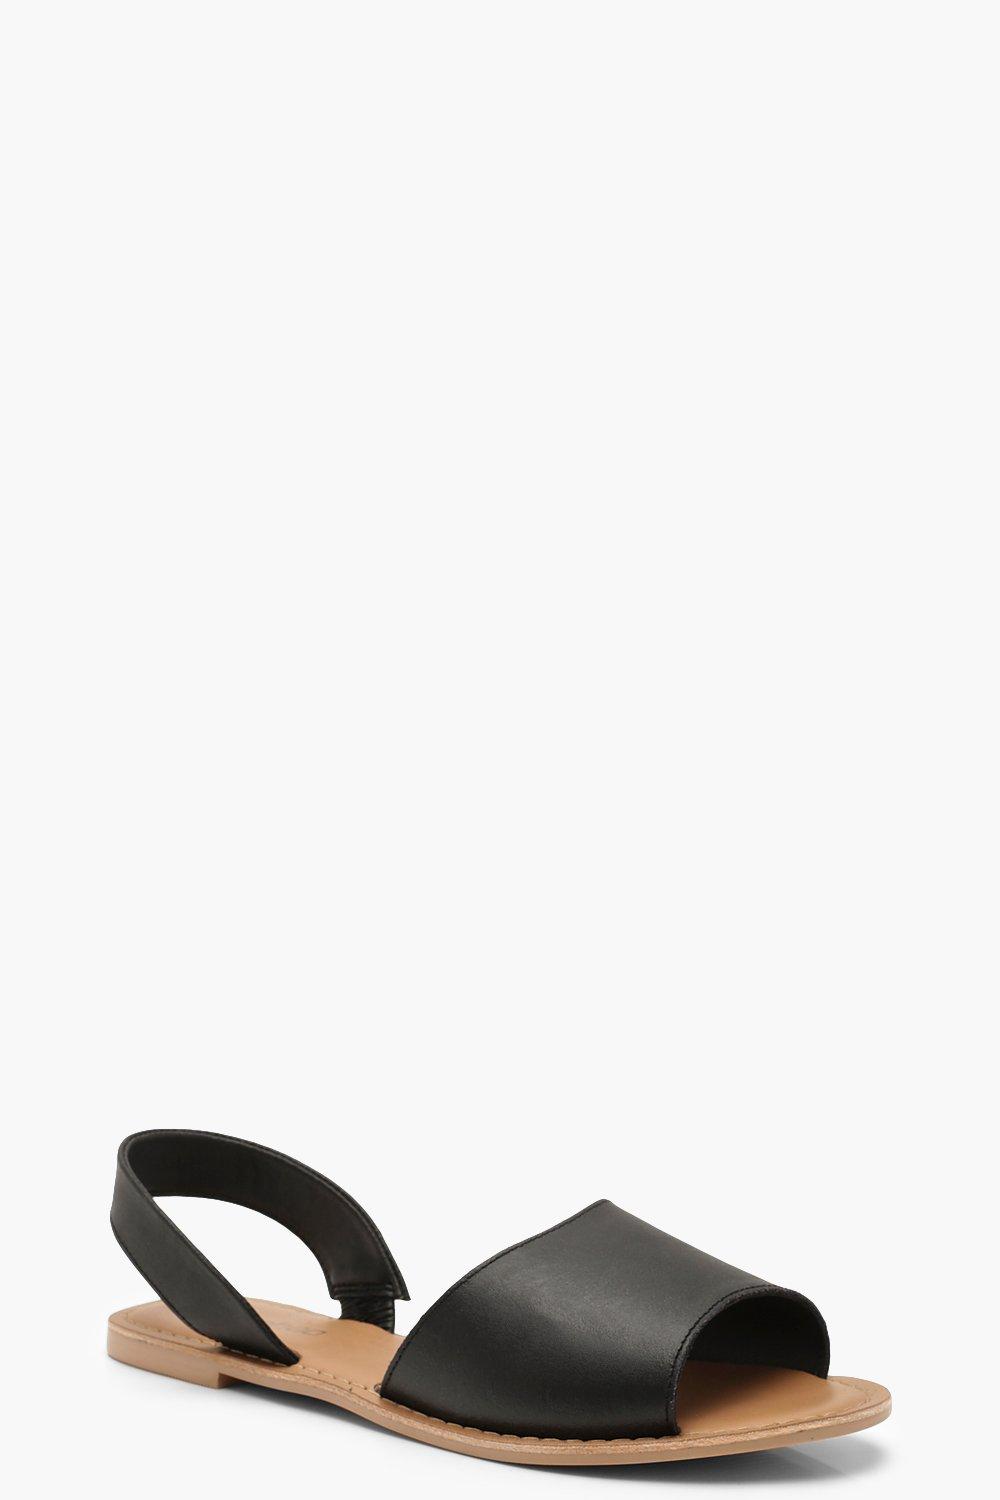 wide fit leather sandals uk